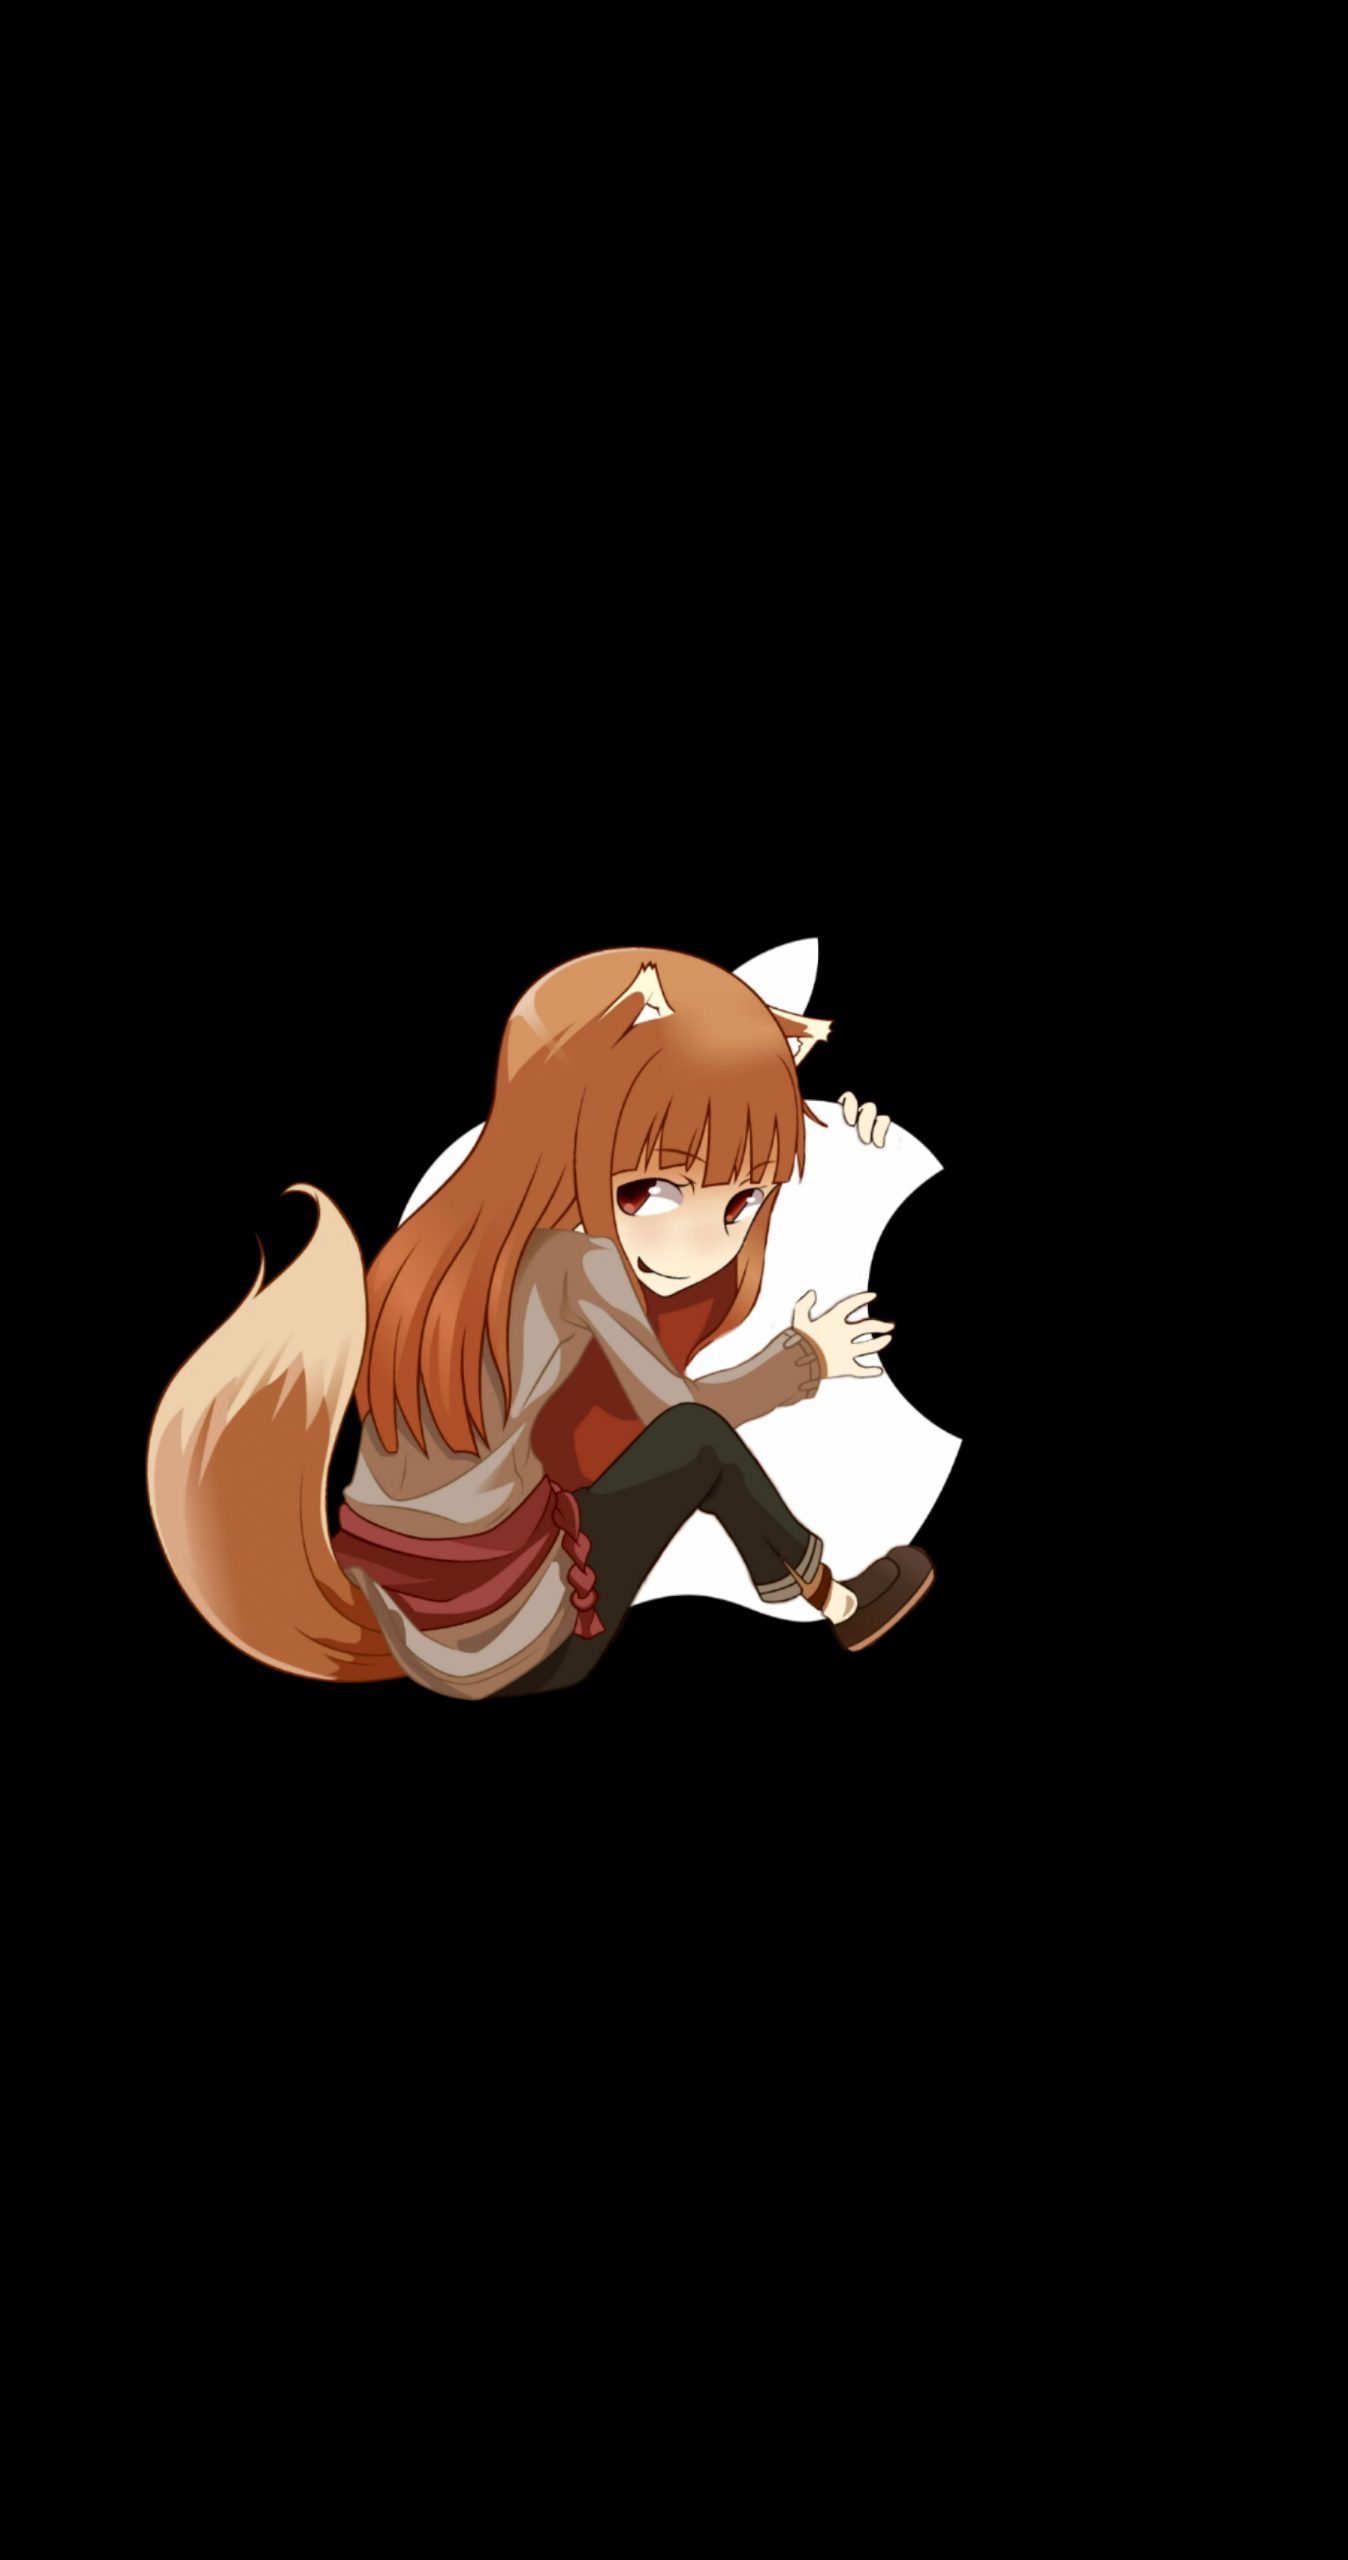 Anime girls amoled wallpaper, Spice and Wolf, Apple Inc., Holo